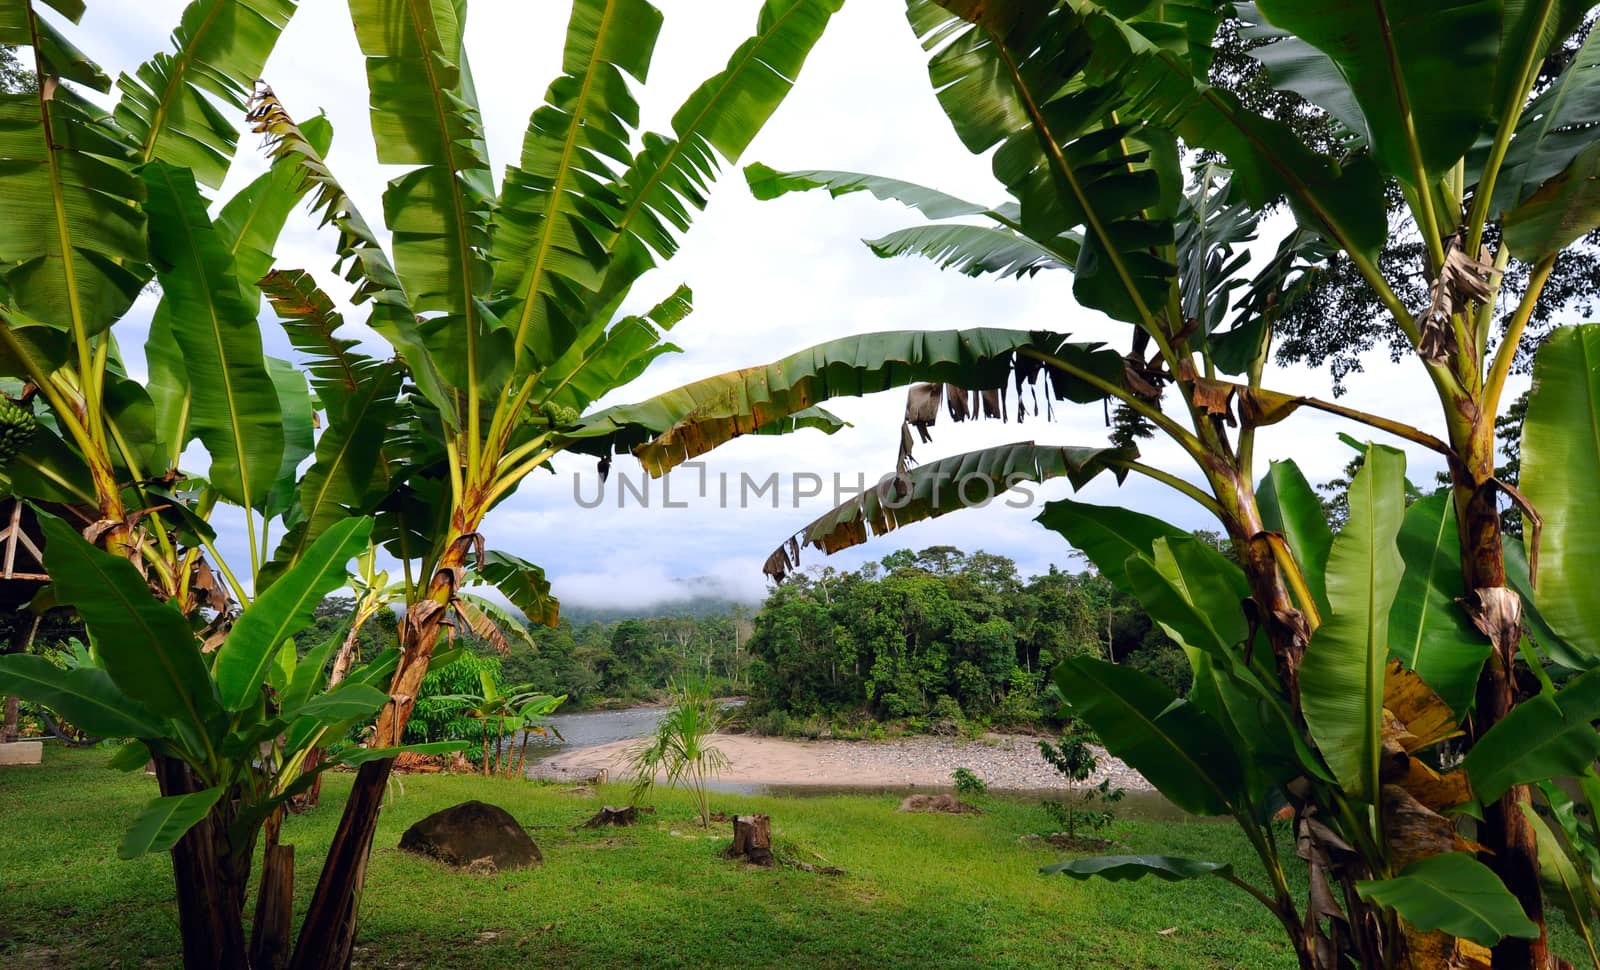 Ecuador as it is: the Amazonia, the sky and bananas by xura